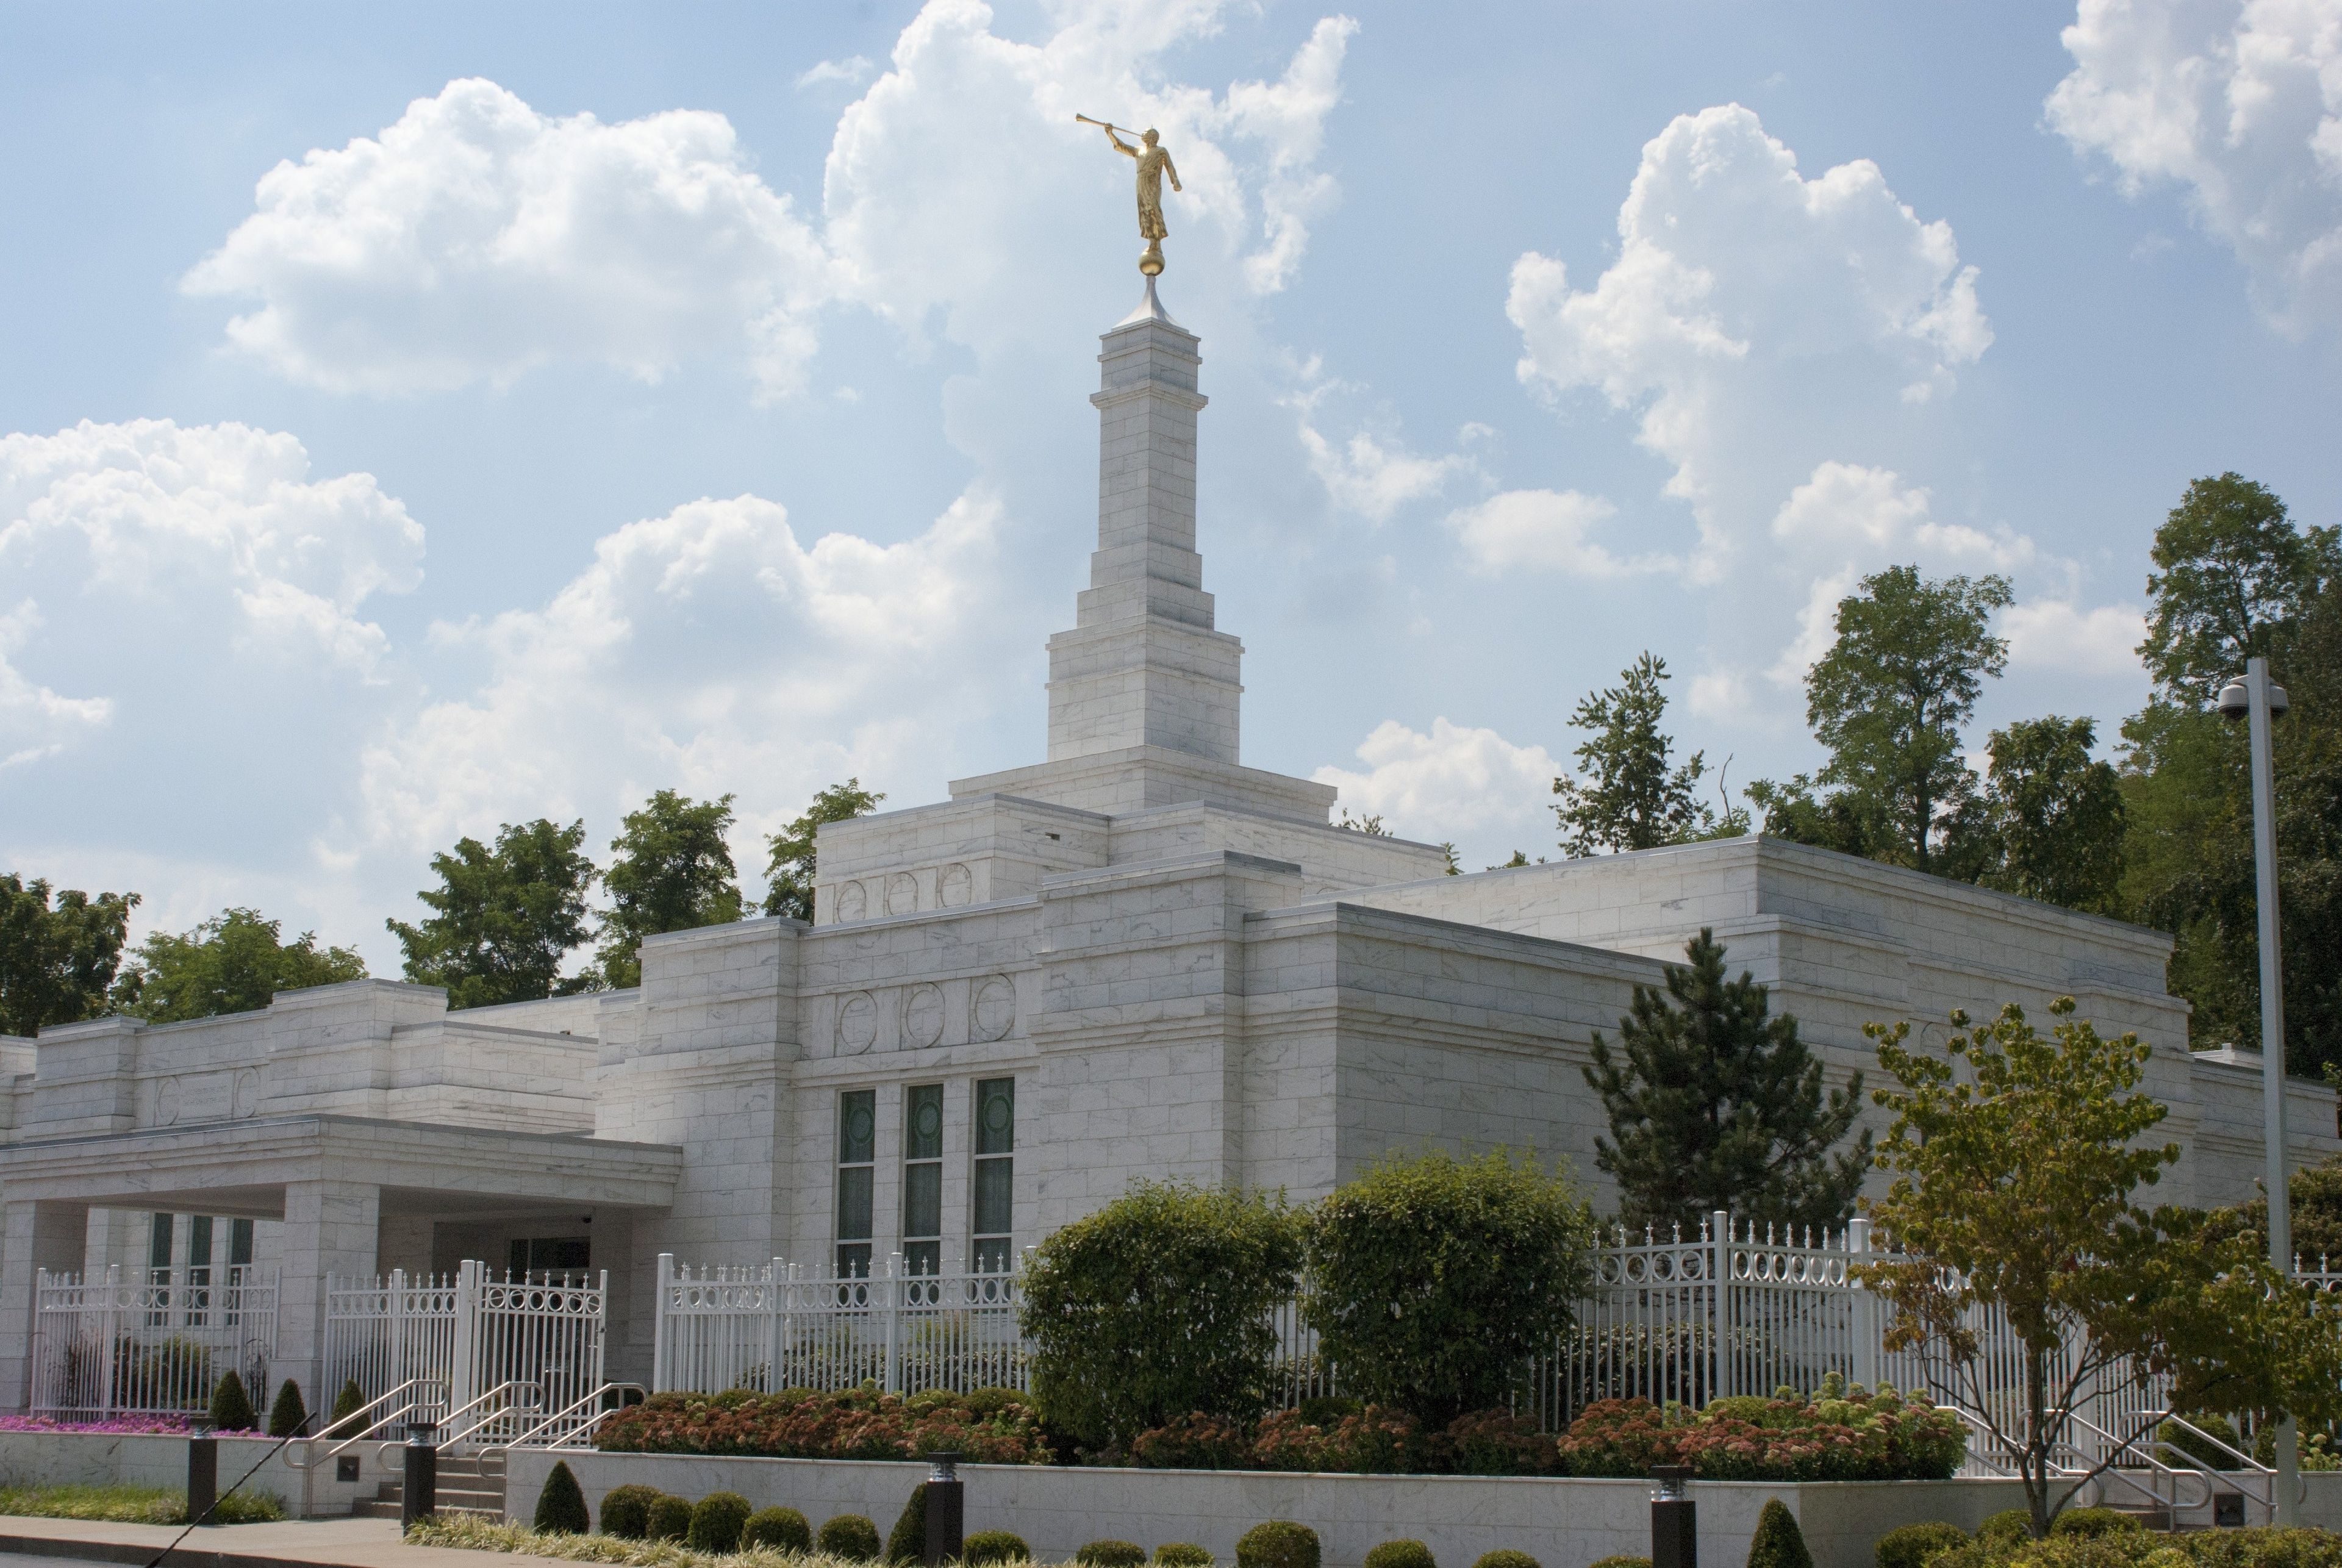 The Louisville Kentucky Temple entrance, including scenery.